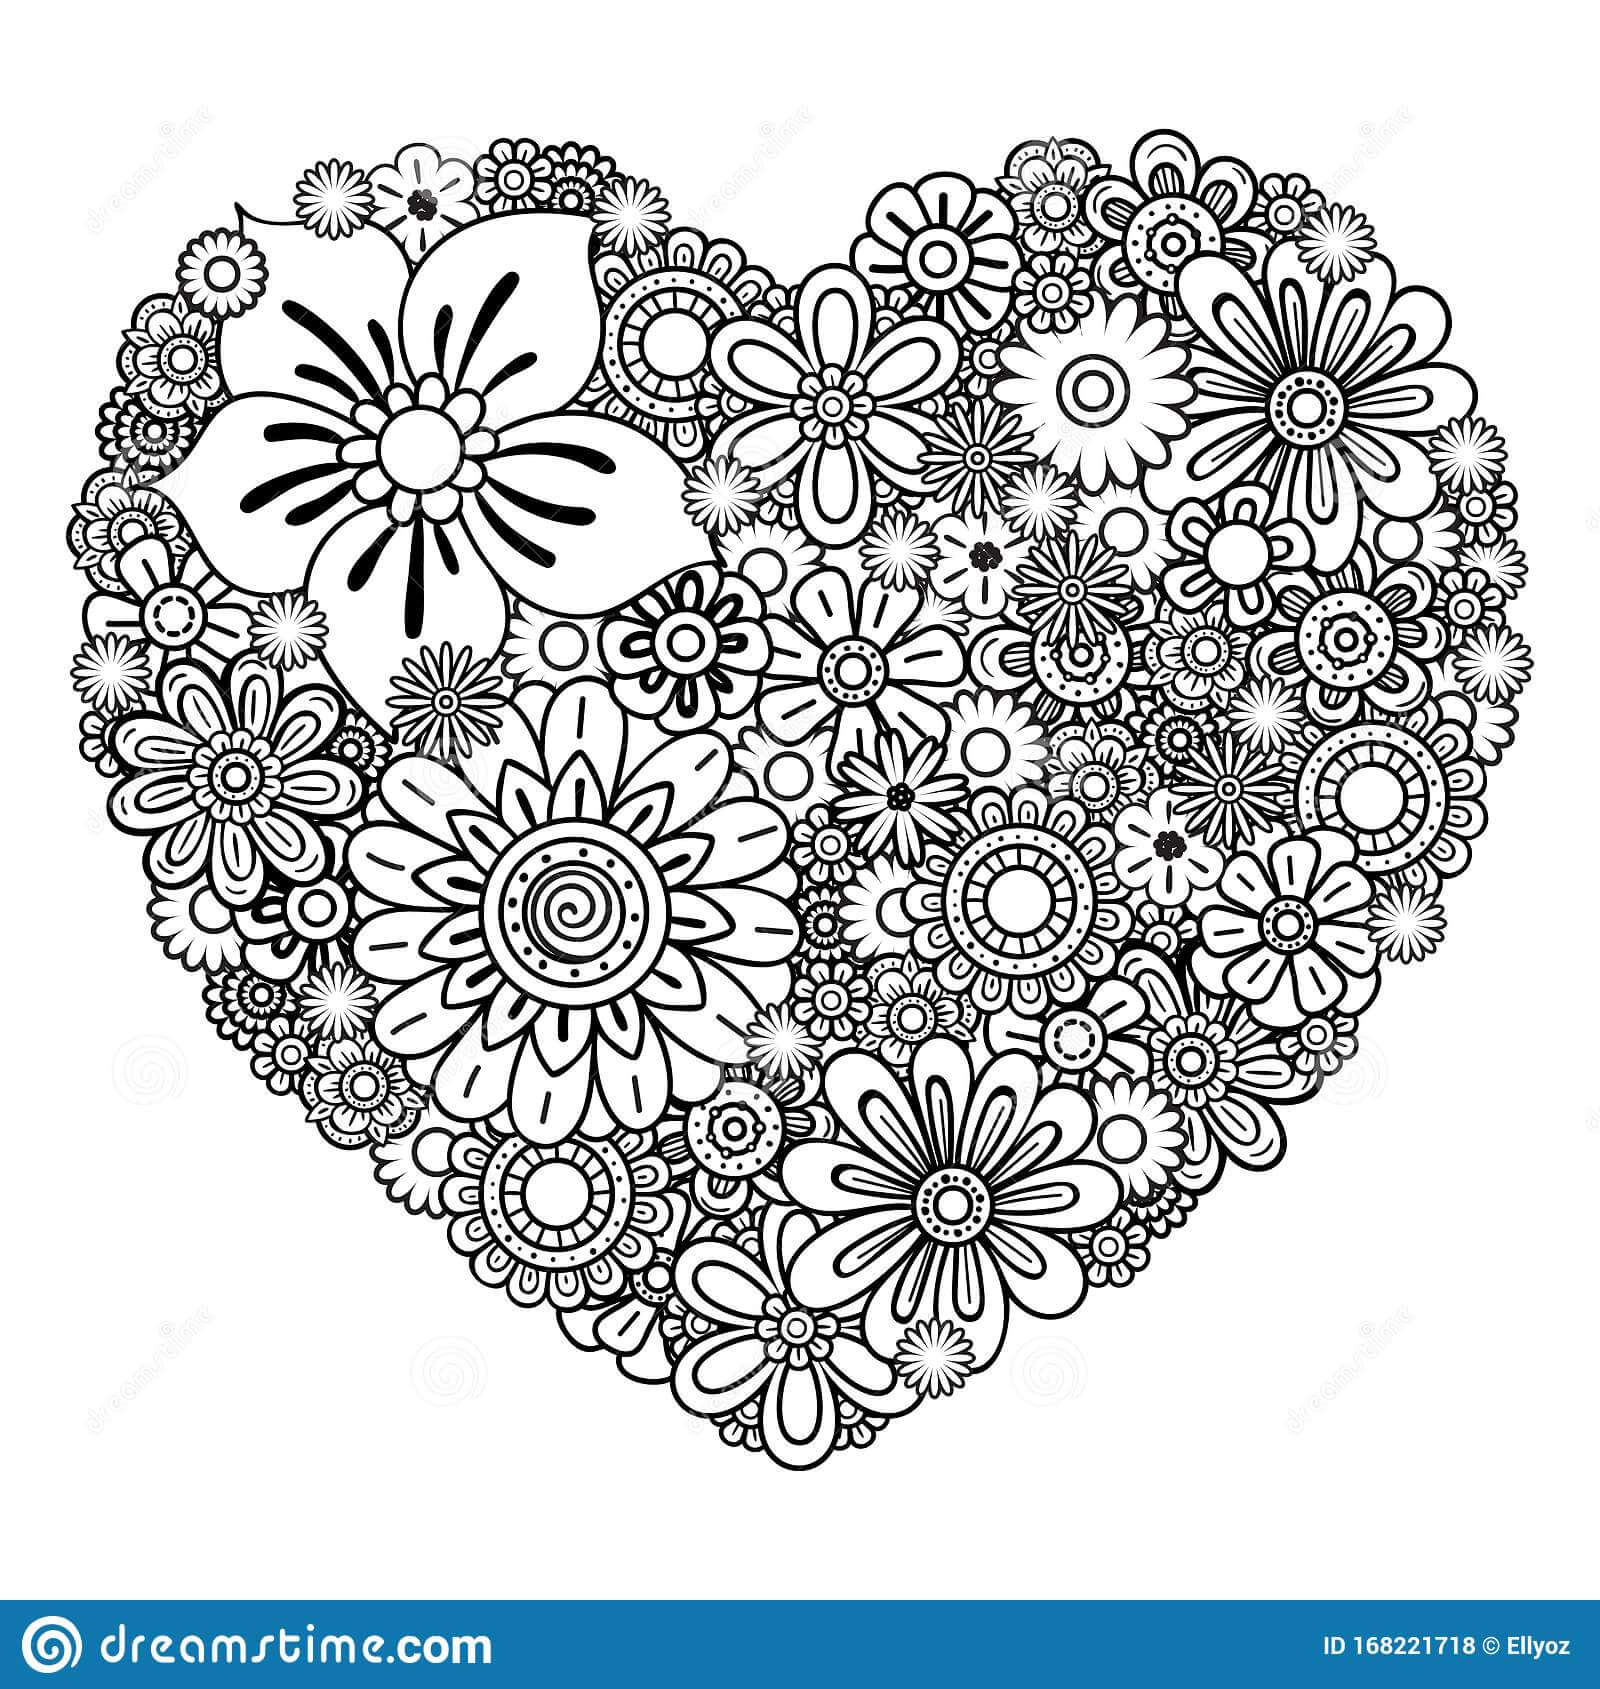 hearts coloring pages for adults | free coloring pages for adults hearts | coloring pages for adults roses and hearts